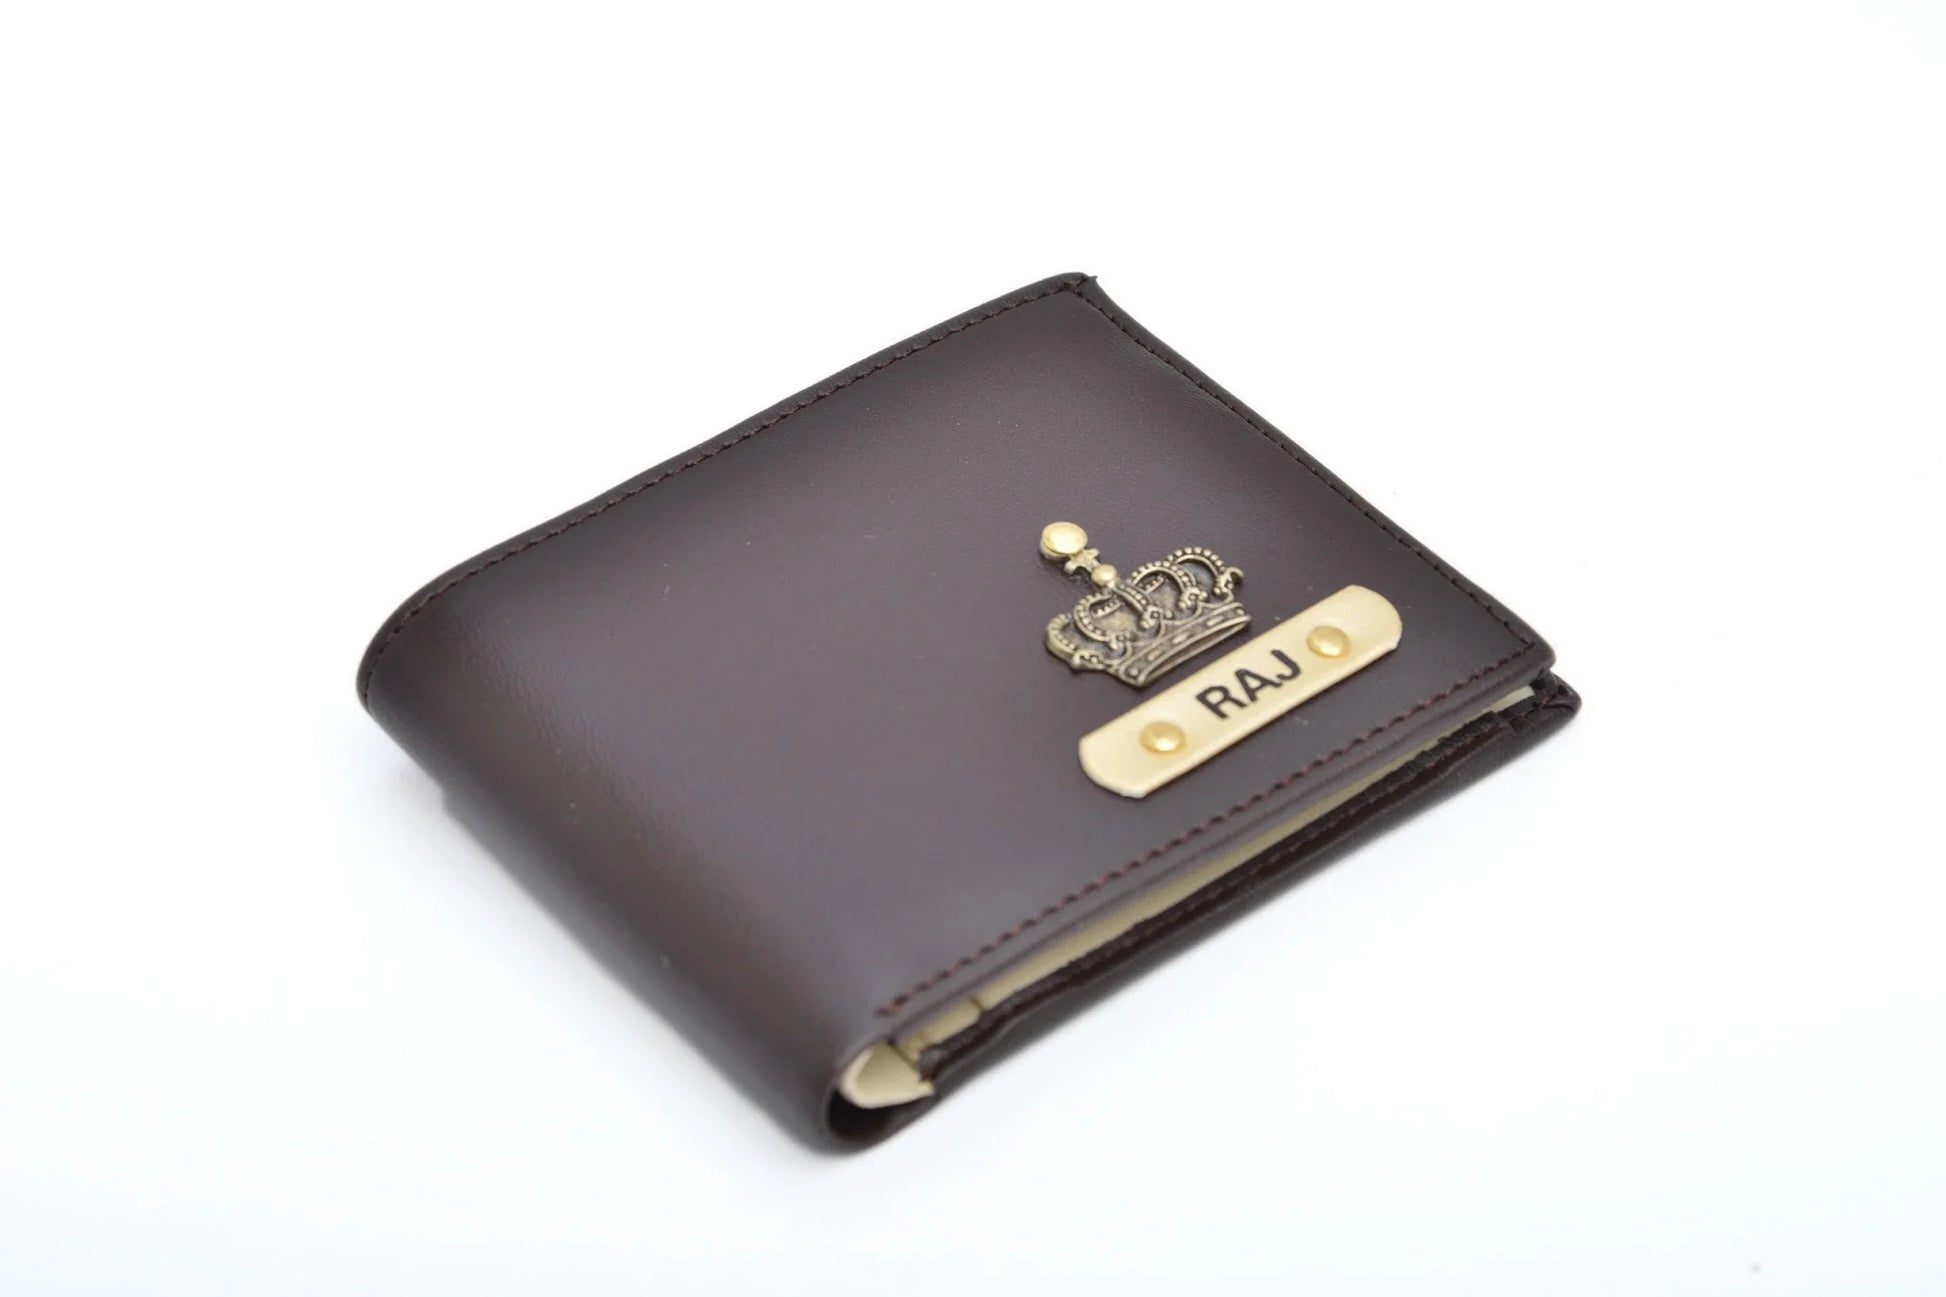 Keep your element of royalty in your wallet with our diverse range of customised and exclusive personalized men’s wallets at the best prices. 

The best part is that Faux leather is very durable. So, this men’s wallet can withstand scratches and scrapes that would mar genuine leather. It is not prone to crack or peel like leather. It will not fade as easily in ultraviolet light and is stain resistant.